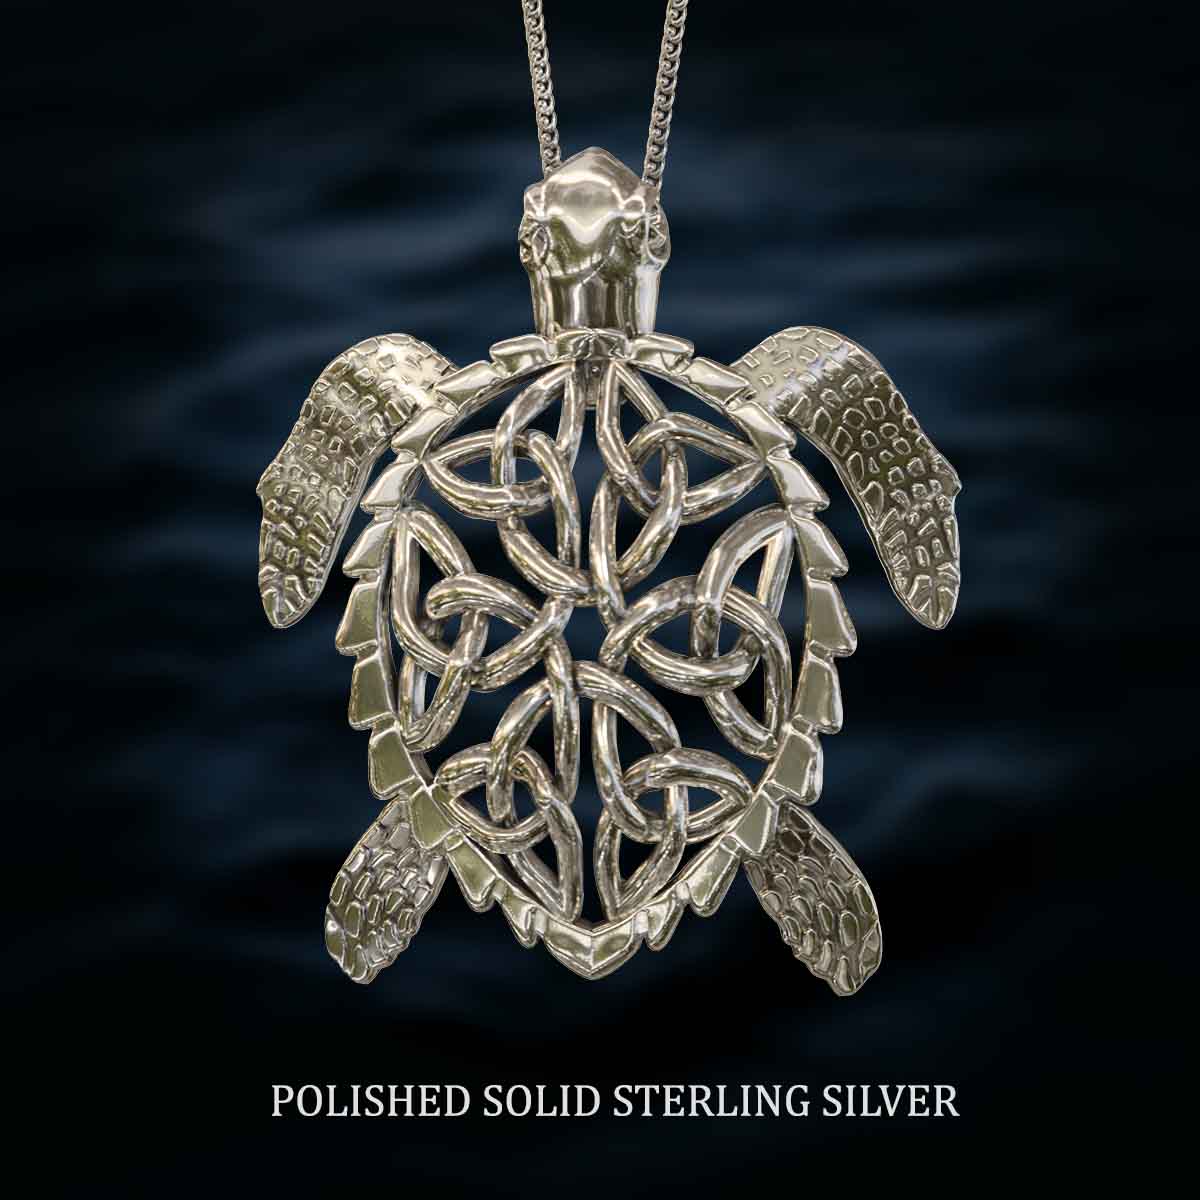     Polished-Solid-Sterling-Silver-Celtic-Sea-Turtle-Pendant-Jewelry-For-Necklace